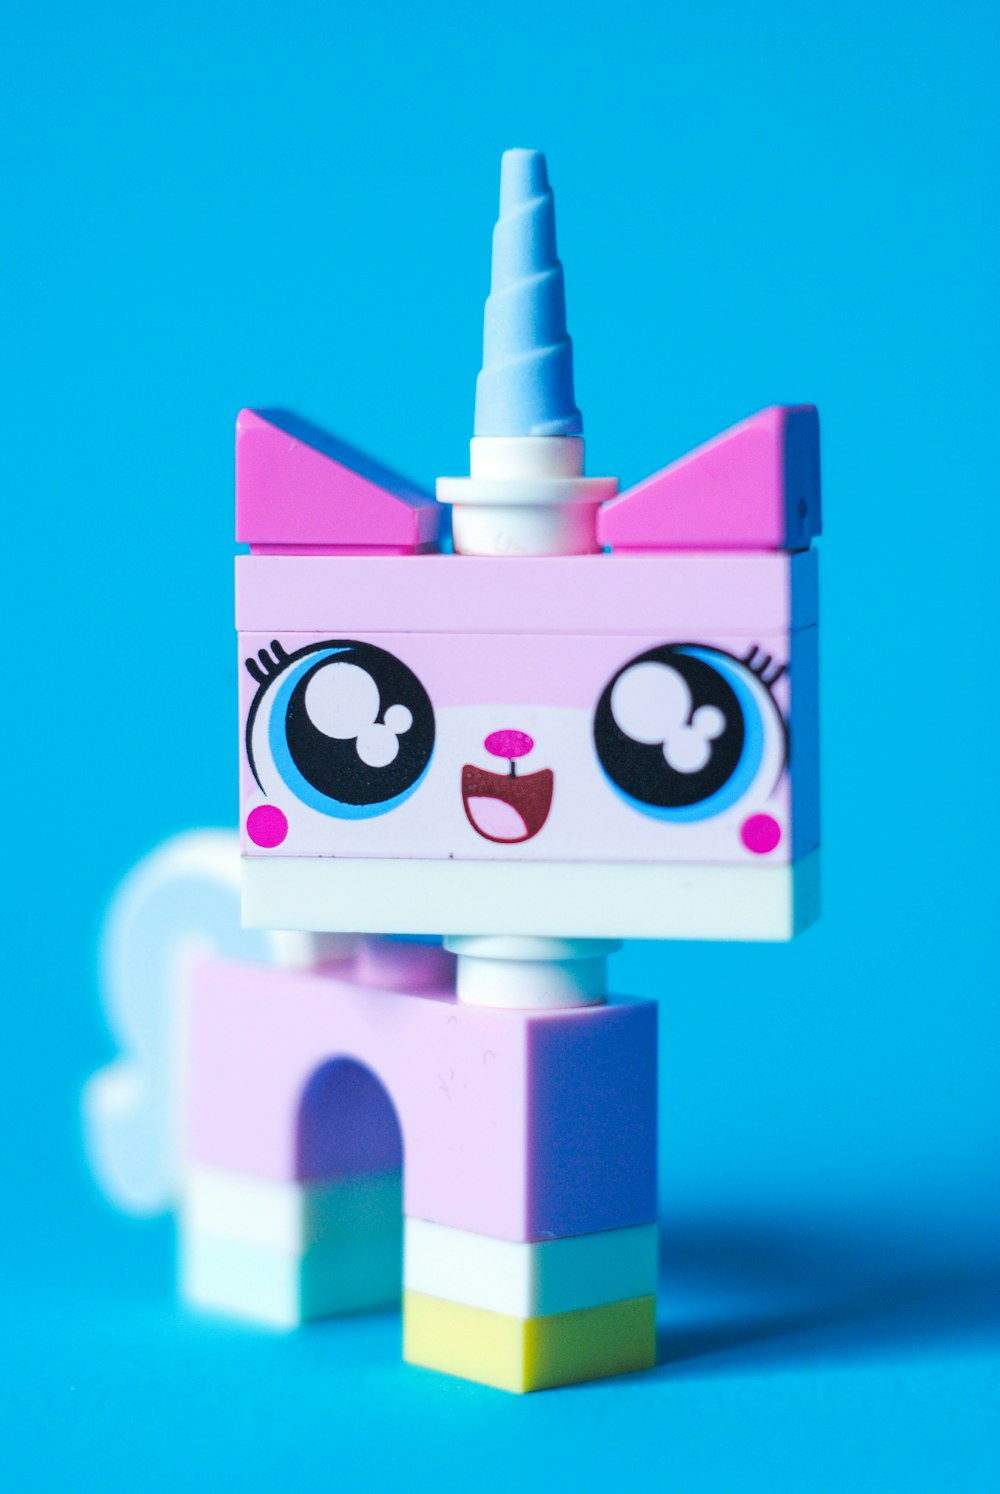 27 Unicorn Pictures Download Free Images On Unsplash - cute unicorn roblox